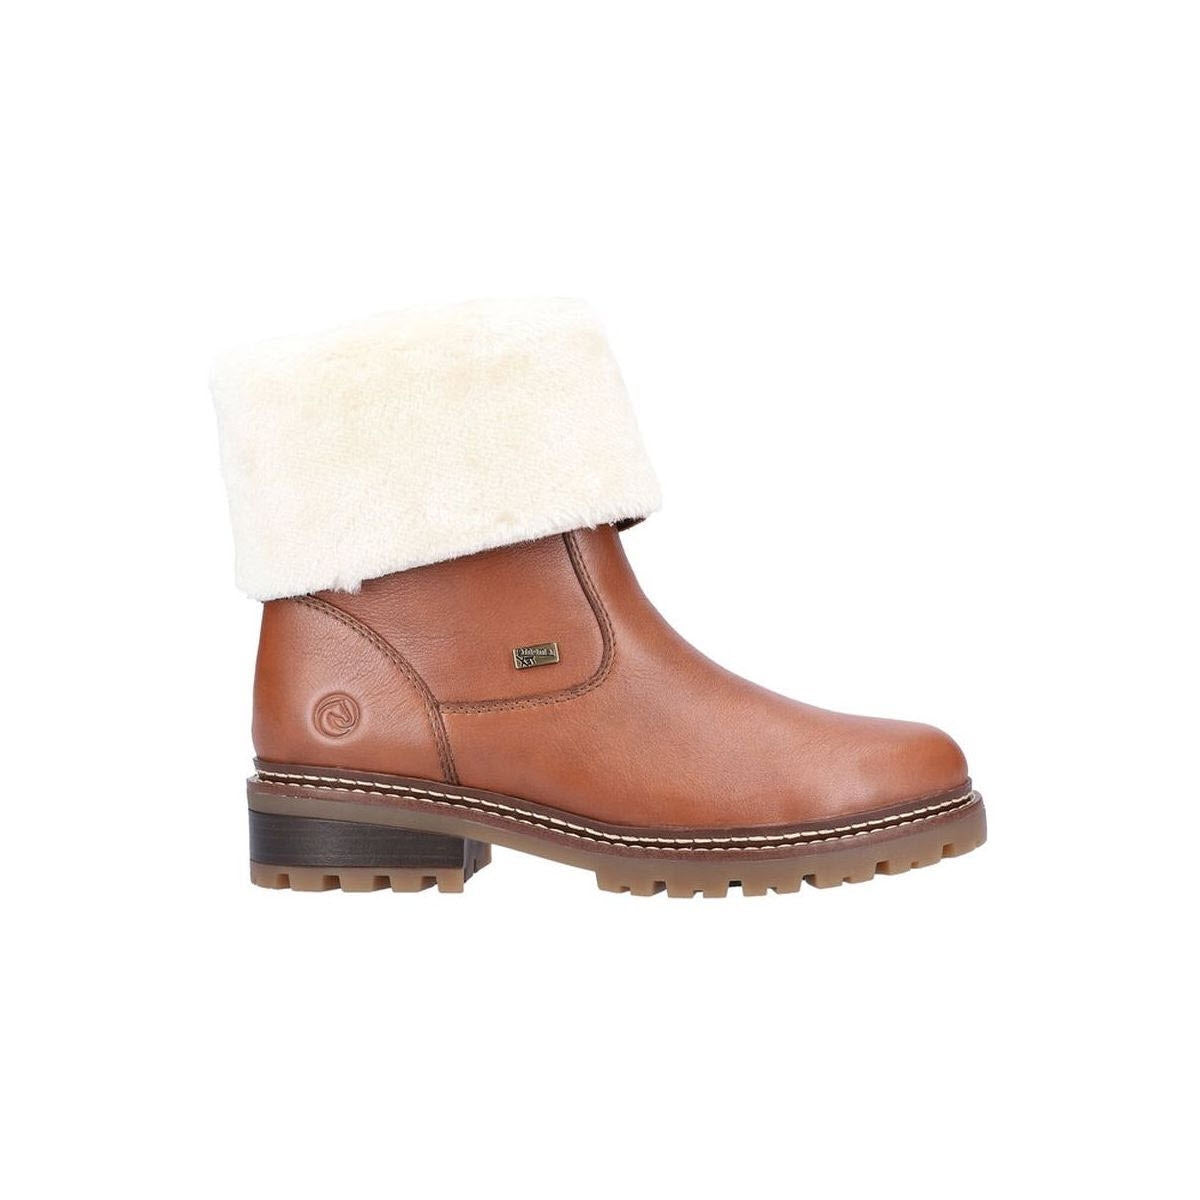 Remonte brown leather boot with a white lambswool lining and a chunky sole, isolated on a white background.